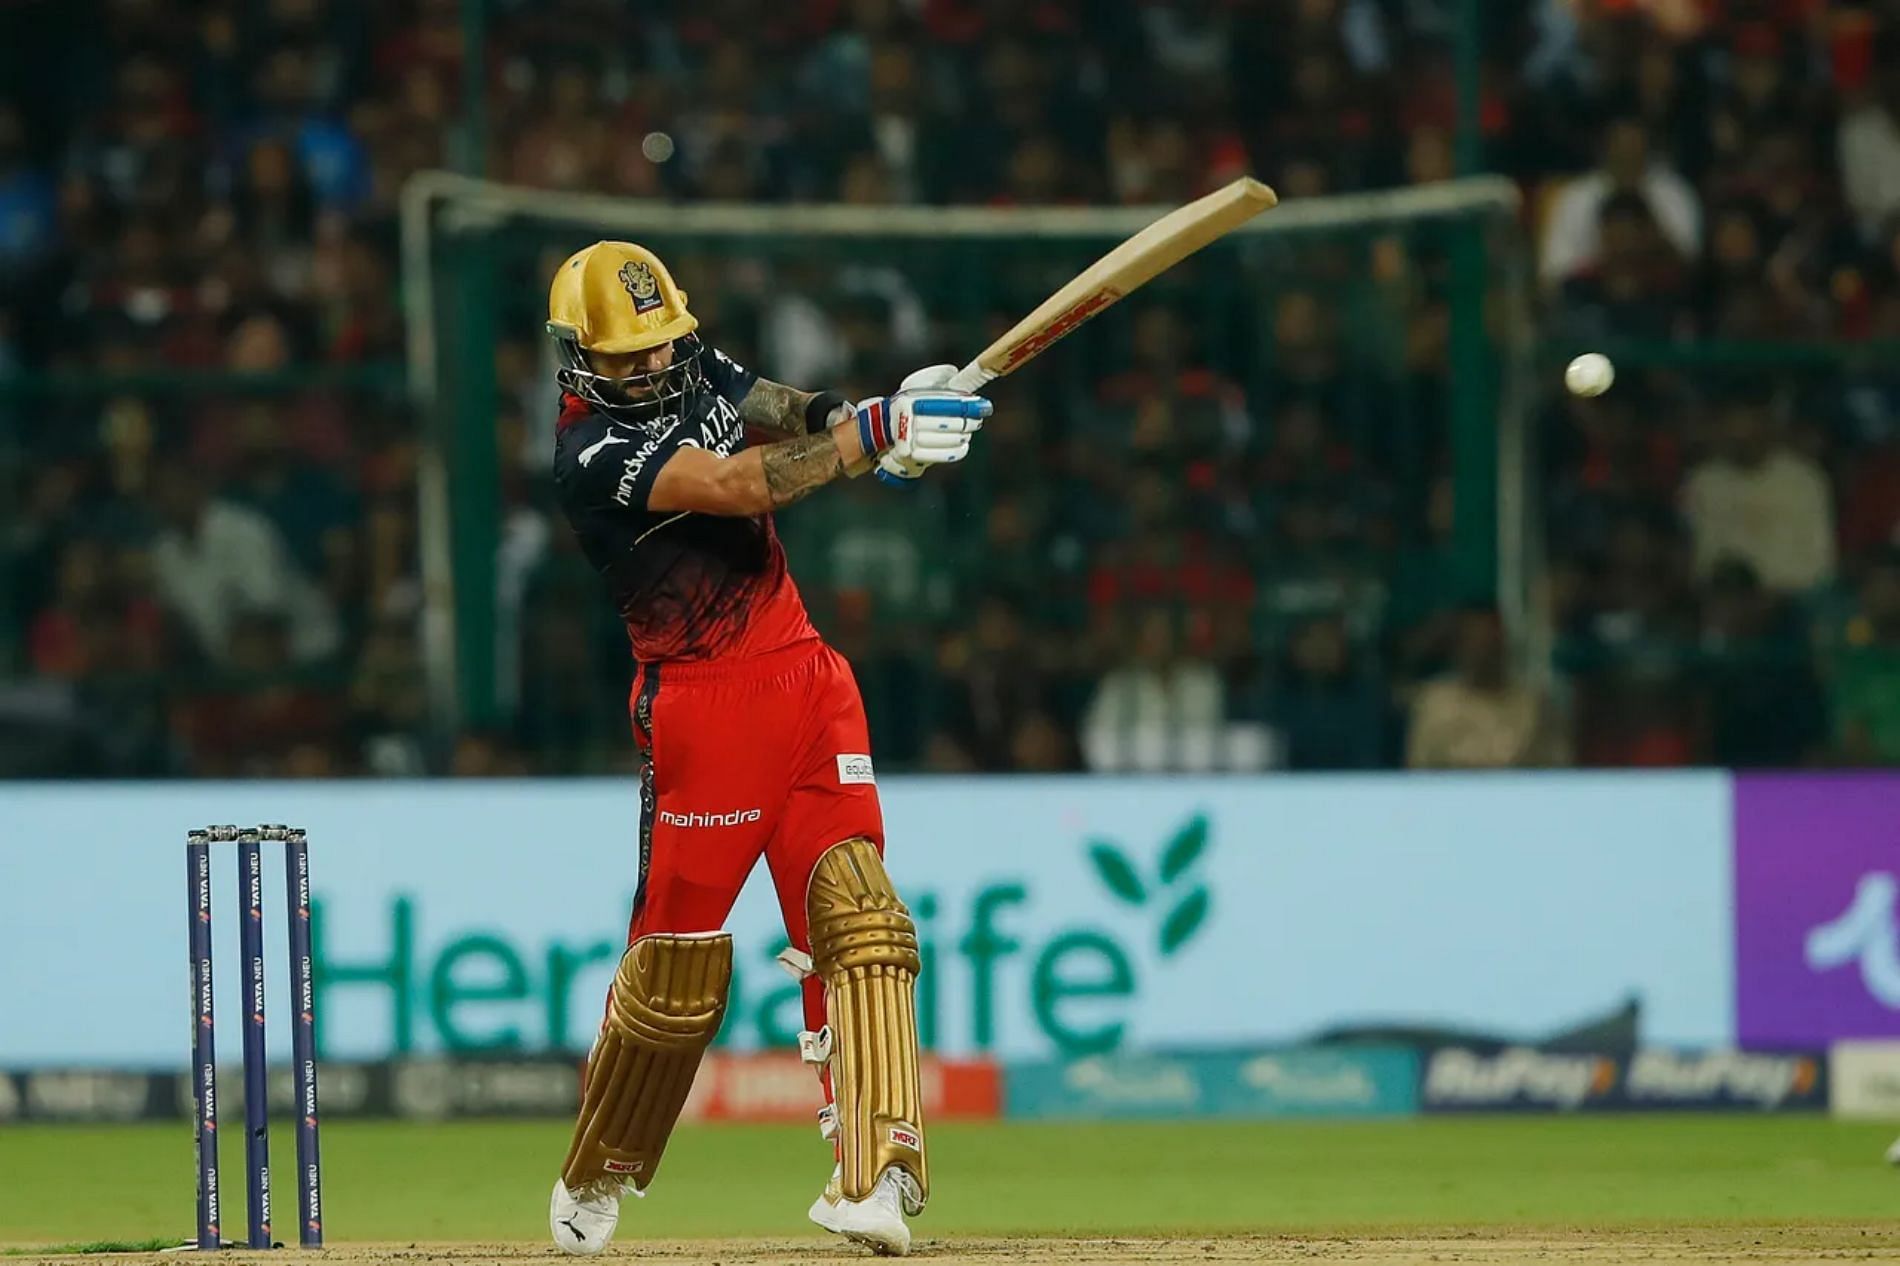 Virat Kohli has been in great form with the willow. (Pic: iplt20.com)